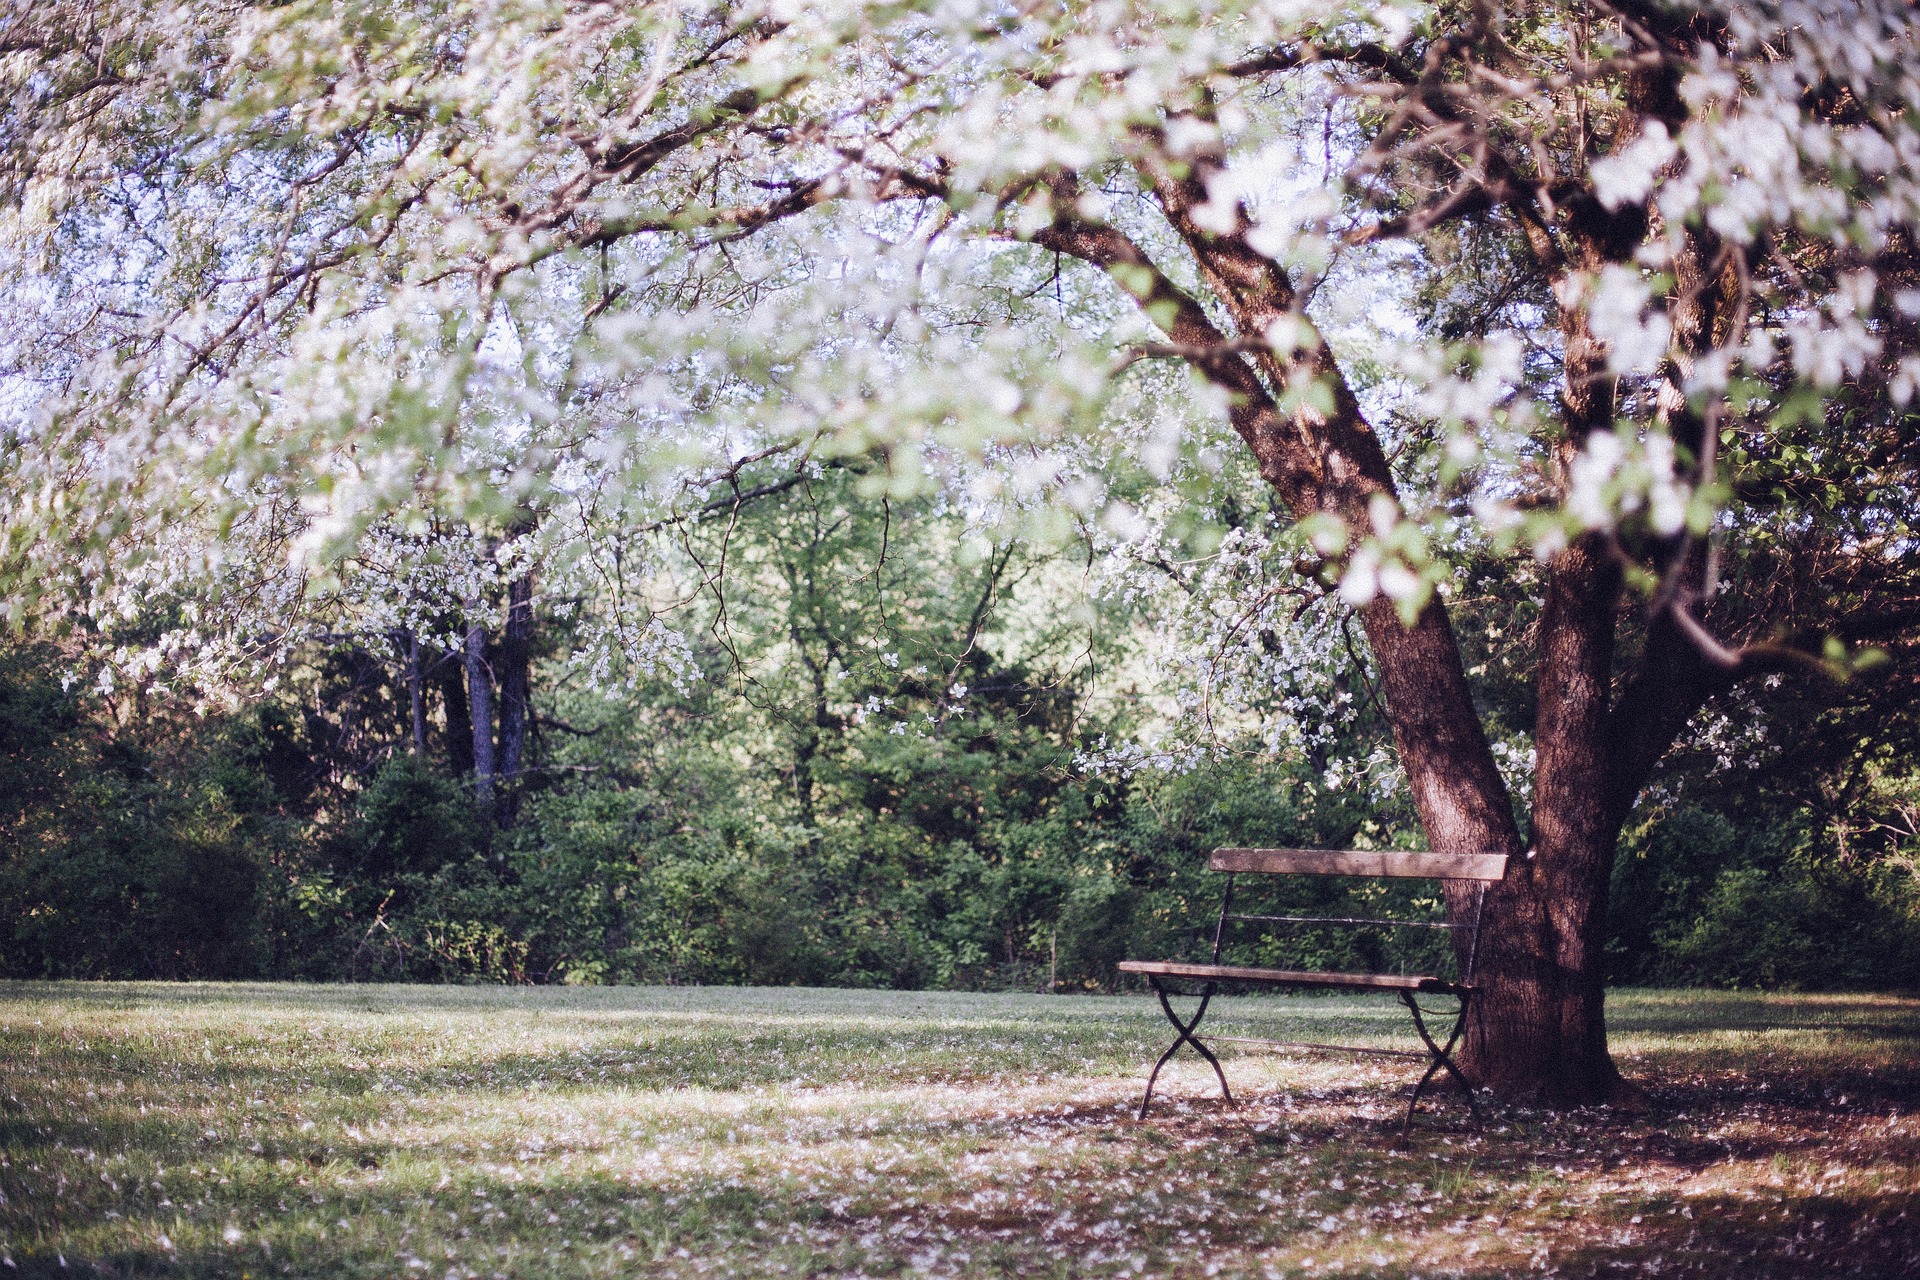 A park with a flowering tree, and a wooden bench under it.